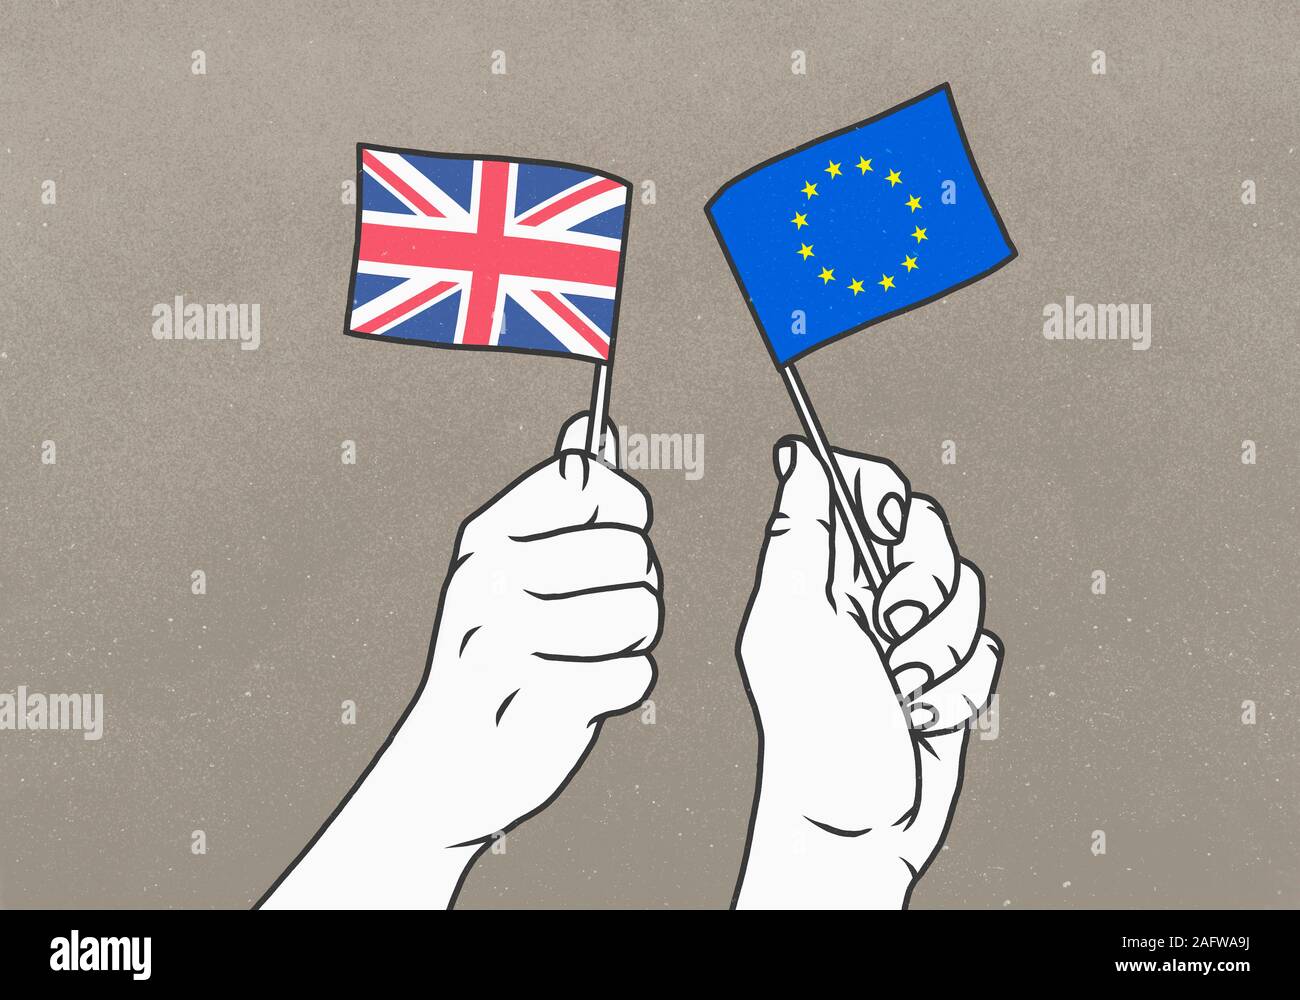 Hands waving small British and European Union flags Stock Photo